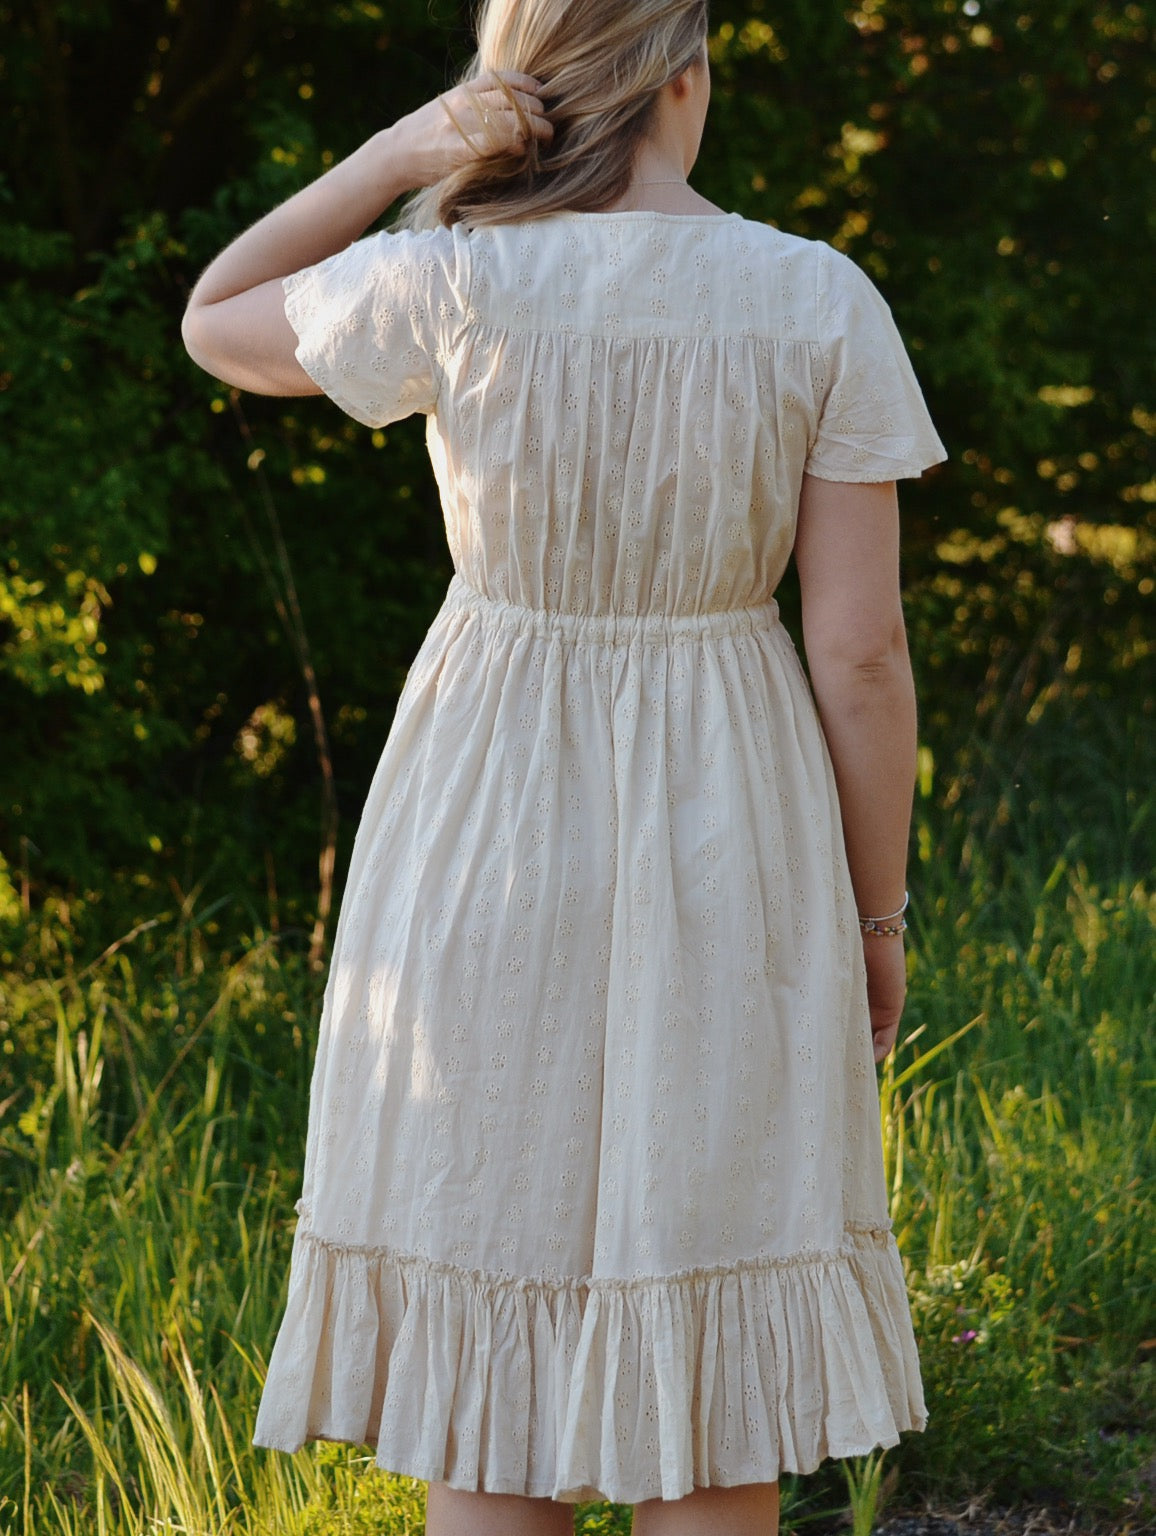 100% RECYCLED COTTON - RU DRESS ANTIQUE WHITE COTTON LACE